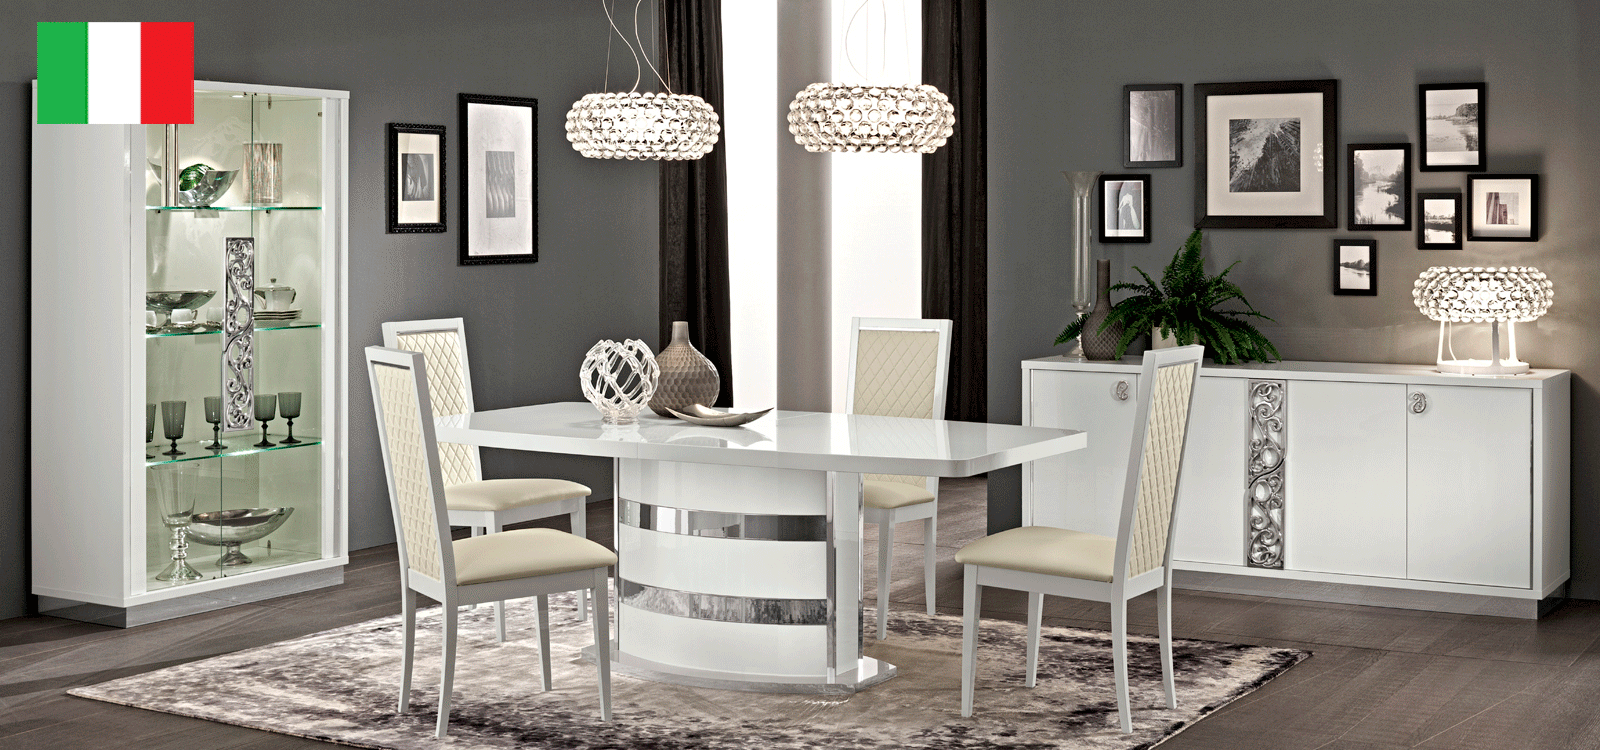 Brands Camel Classic Living Rooms, Italy Roma Dining White, Italy